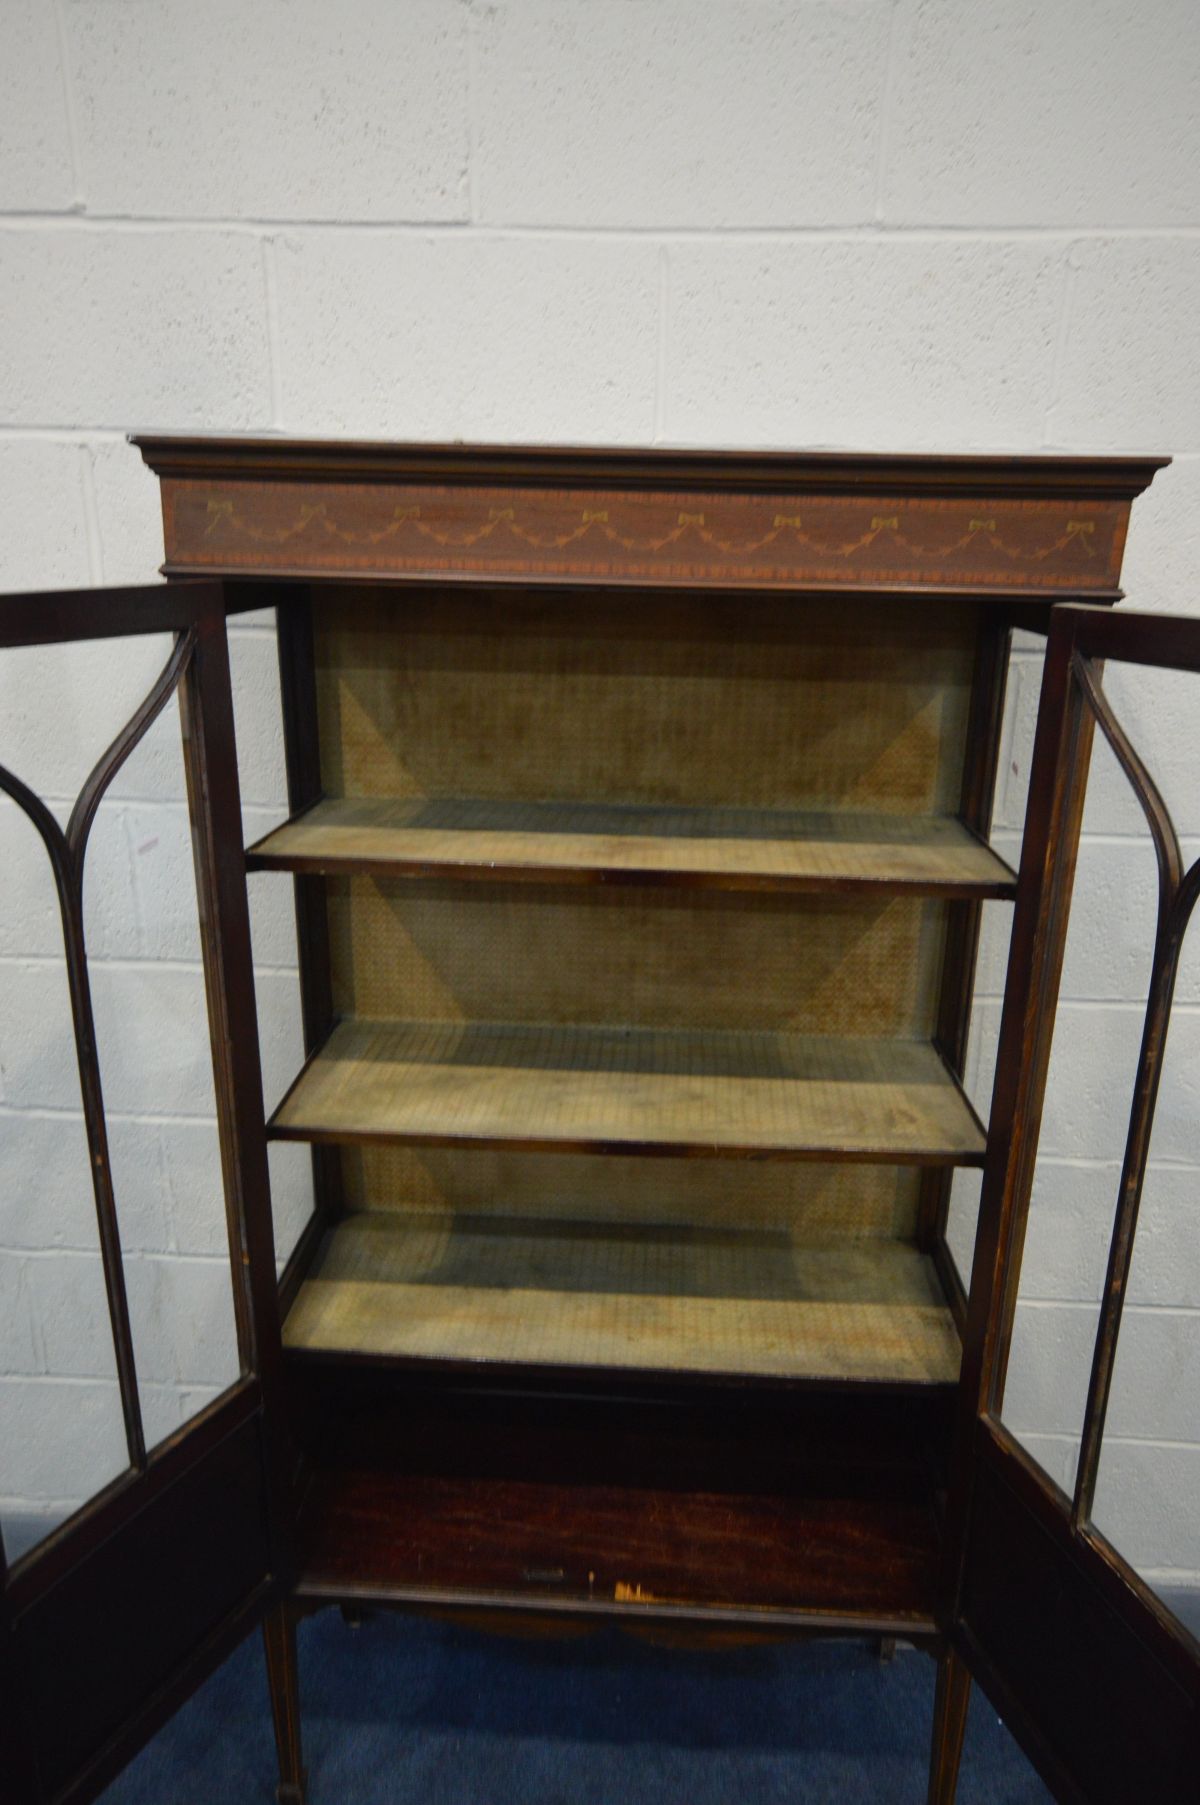 AN EDWARDIAN MAHOGANY AND INLAID TWO DOOR ASTRAGAL GLAZED DISPLAY CABINET, with two shelves, on - Image 3 of 4